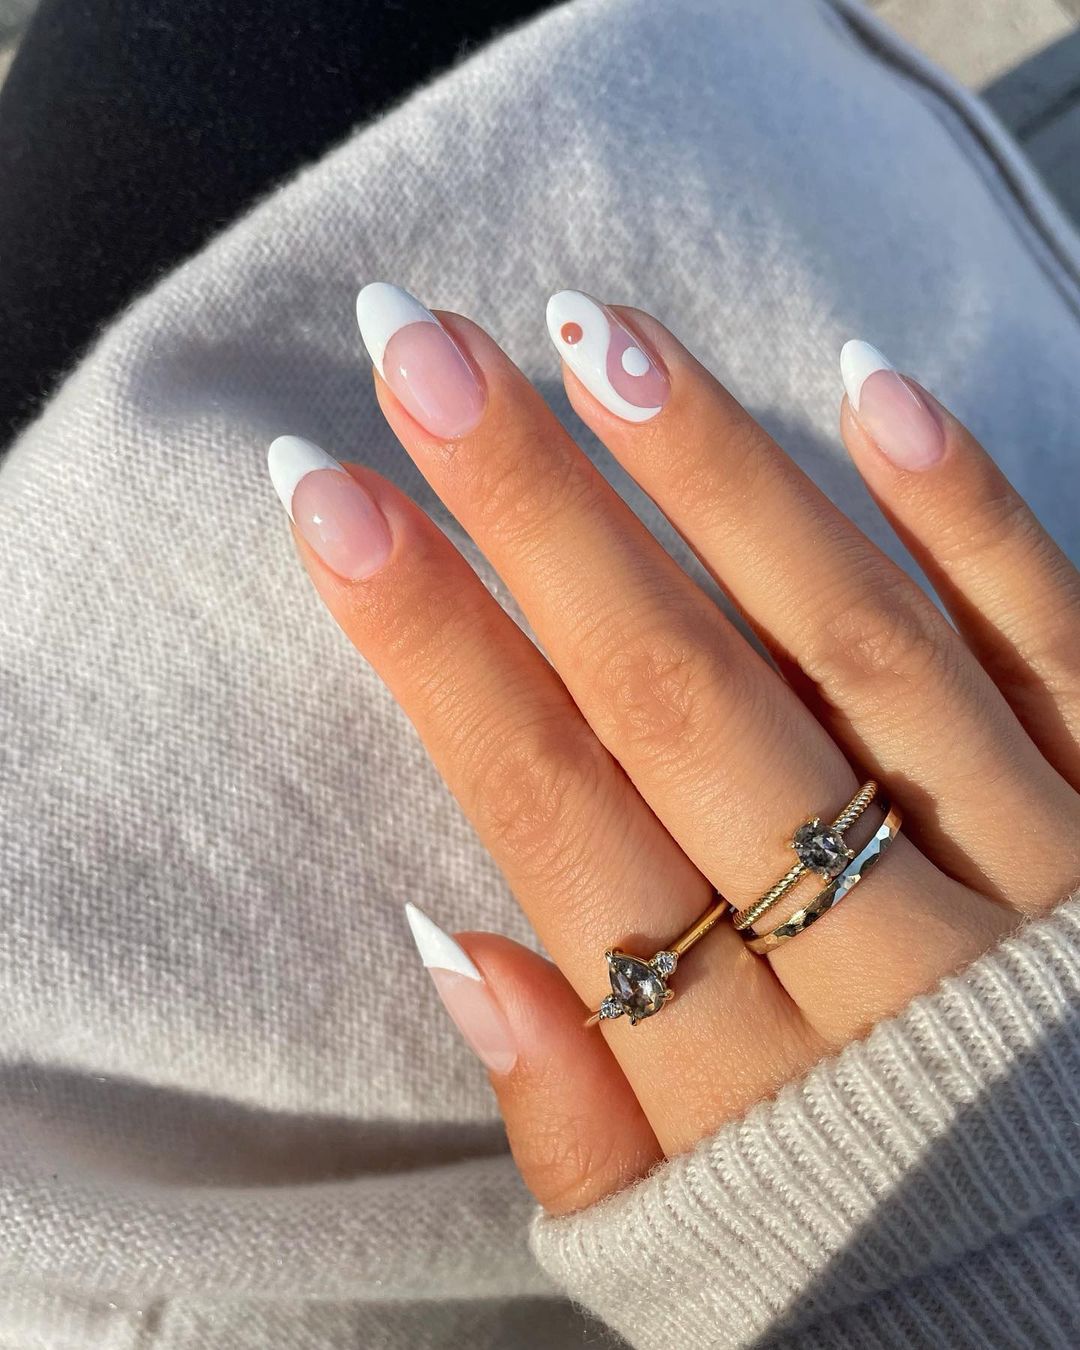 50+ Fall Nail Ideas You’re Going To Obsess Over images 19